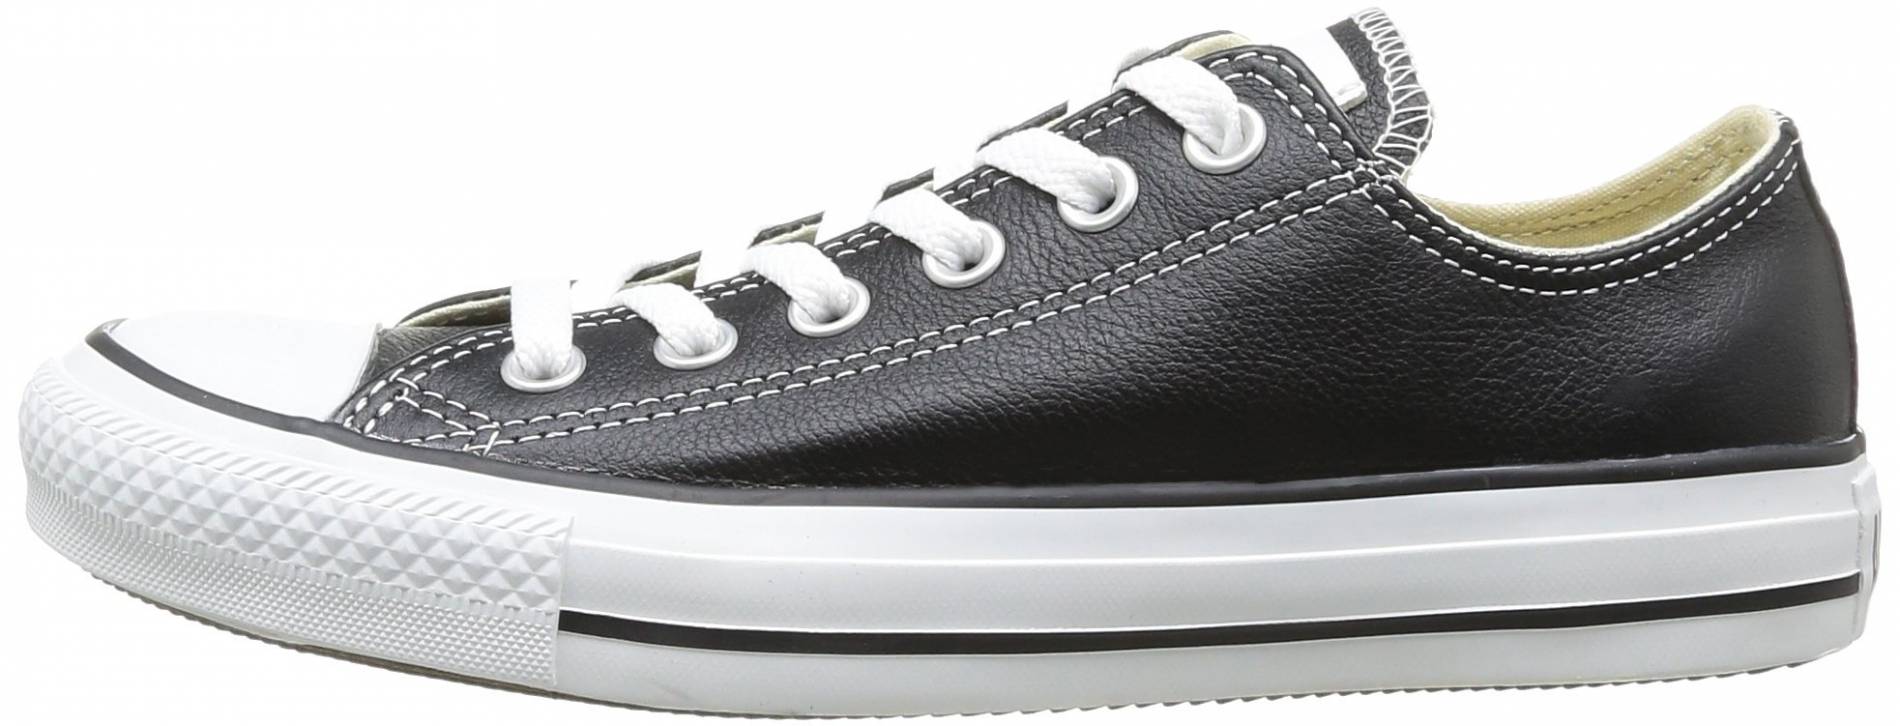 Converse Chuck Taylor All Star Leather Low Top sneakers in 3 ... غرفة ساونا